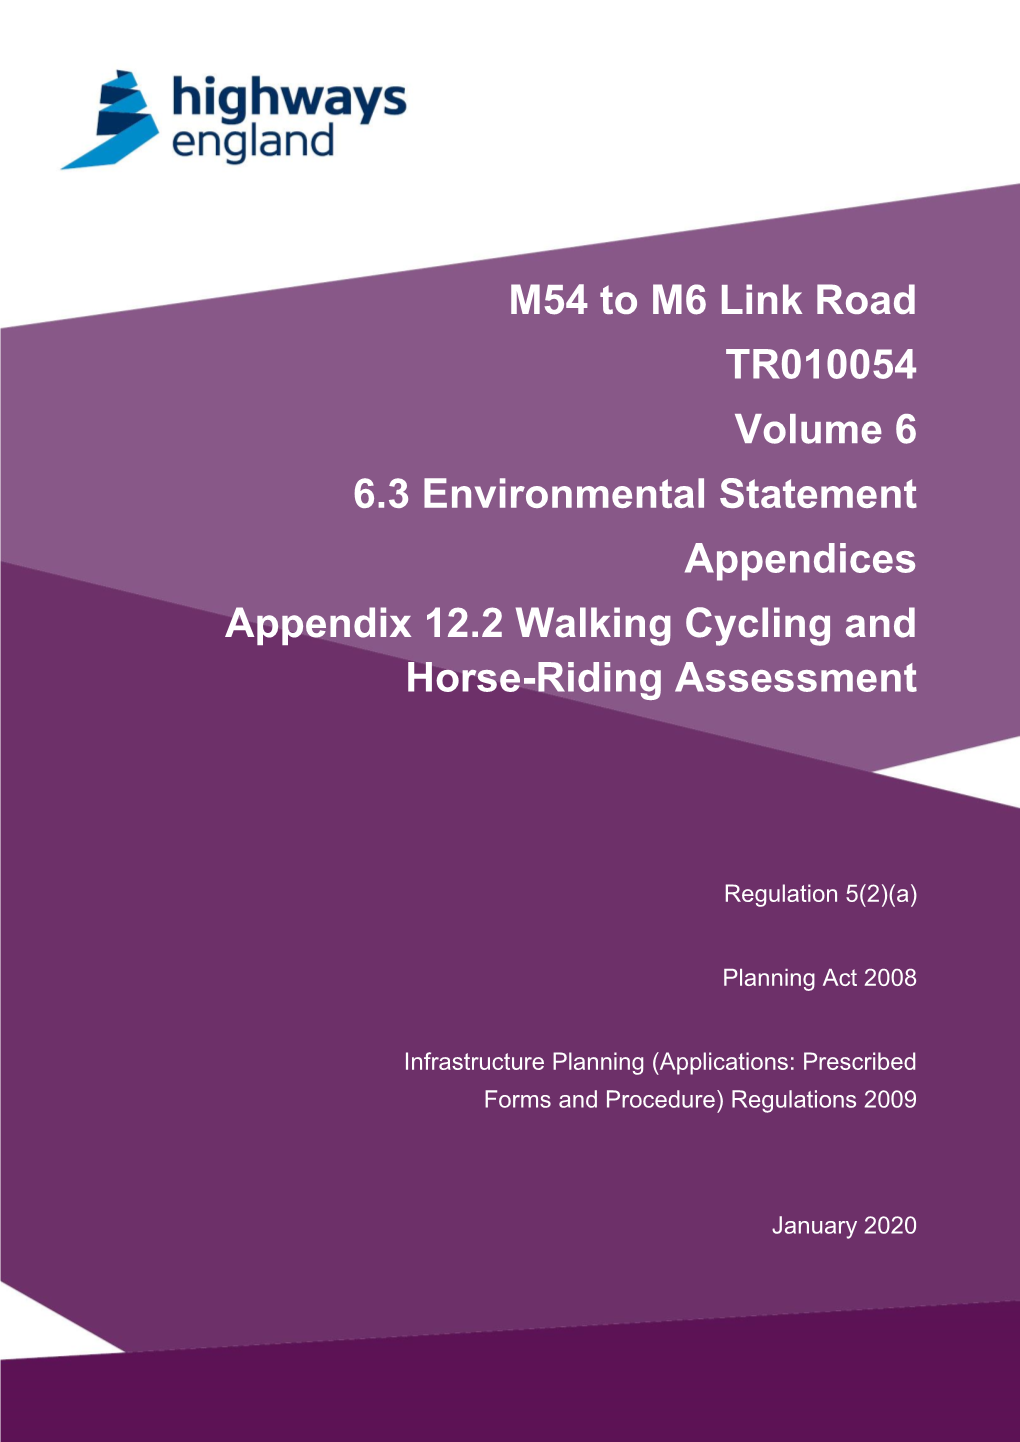 M54 to M6 Link Road TR010054 Volume 6 6.3 Environmental Statement Appendices Appendix 12.2 Walking Cycling and Horse-Riding Assessment